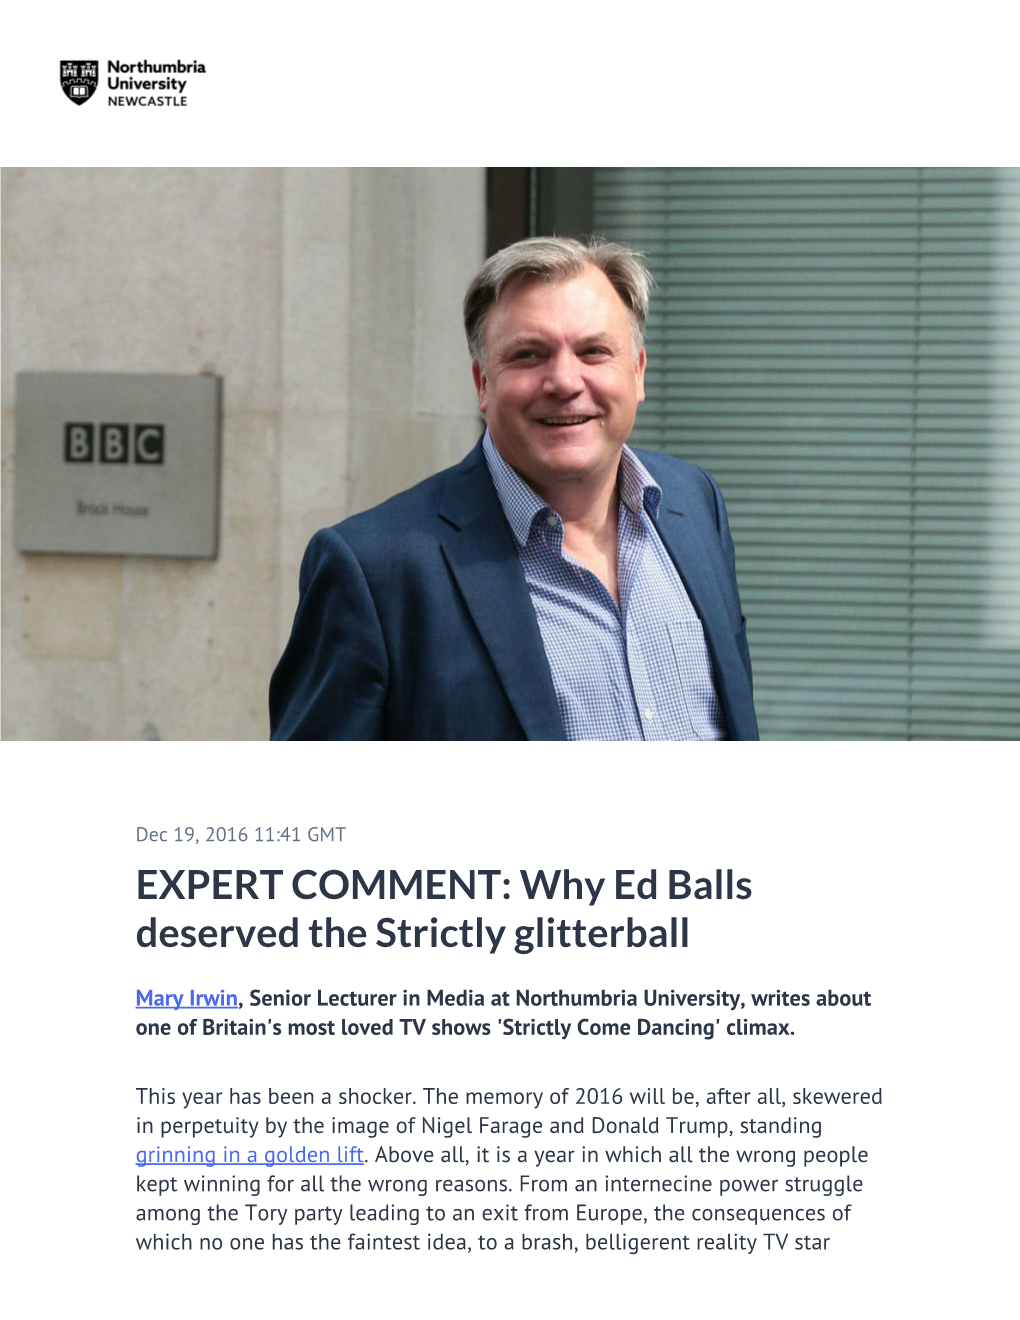 Why Ed Balls Deserved the Strictly Glitterball